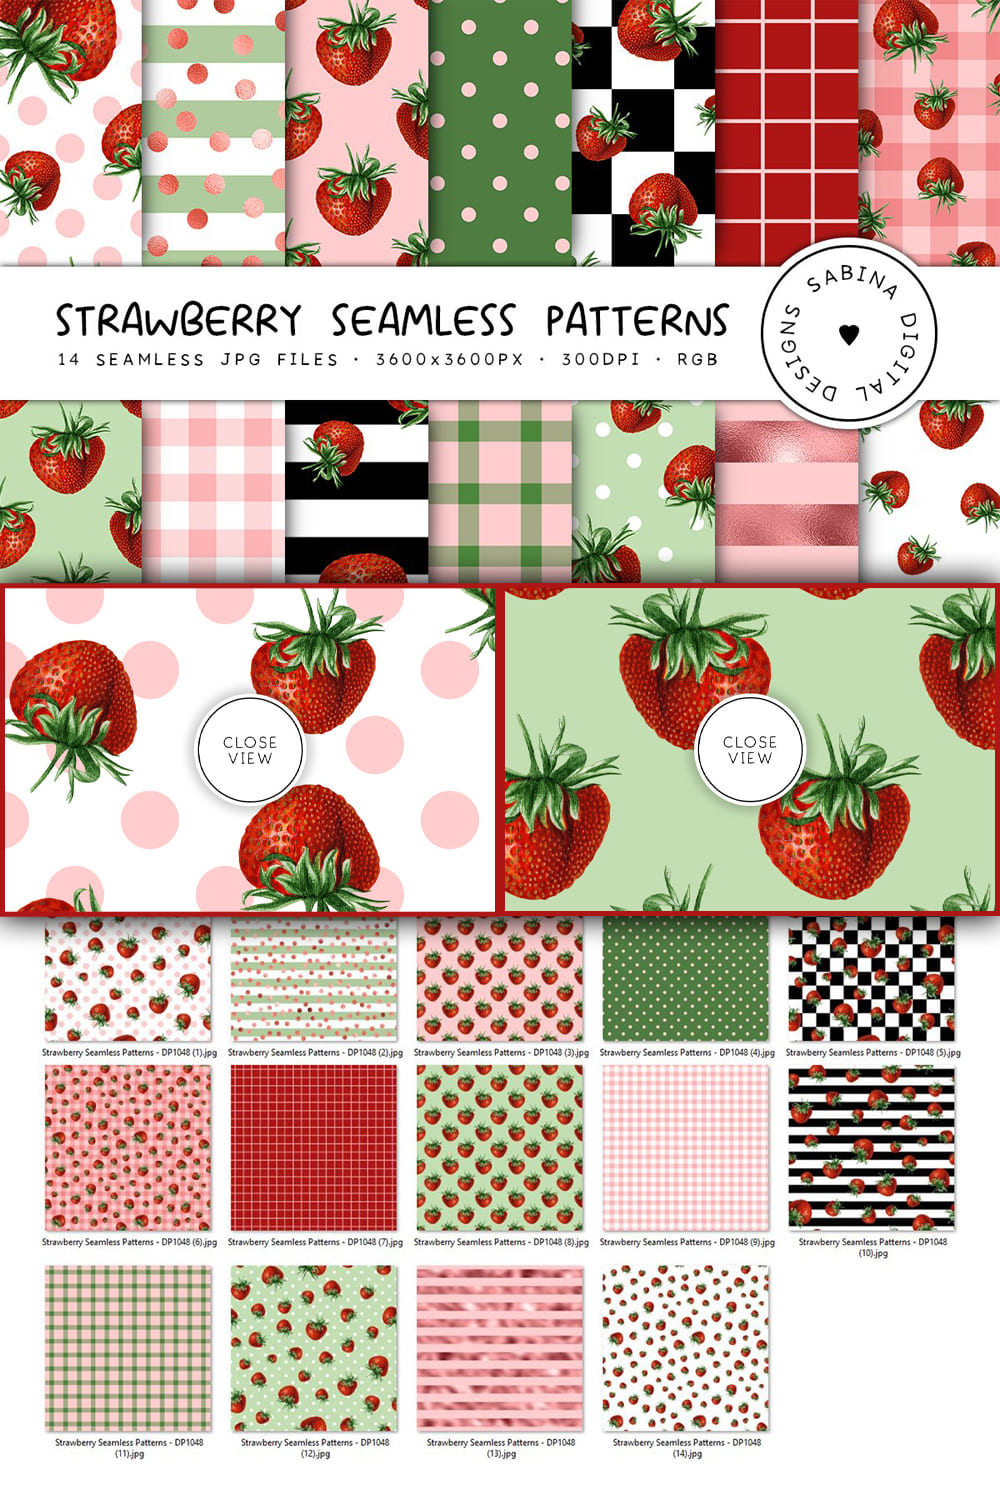 Strawberry Seamless Patterns - pinterest image preview.